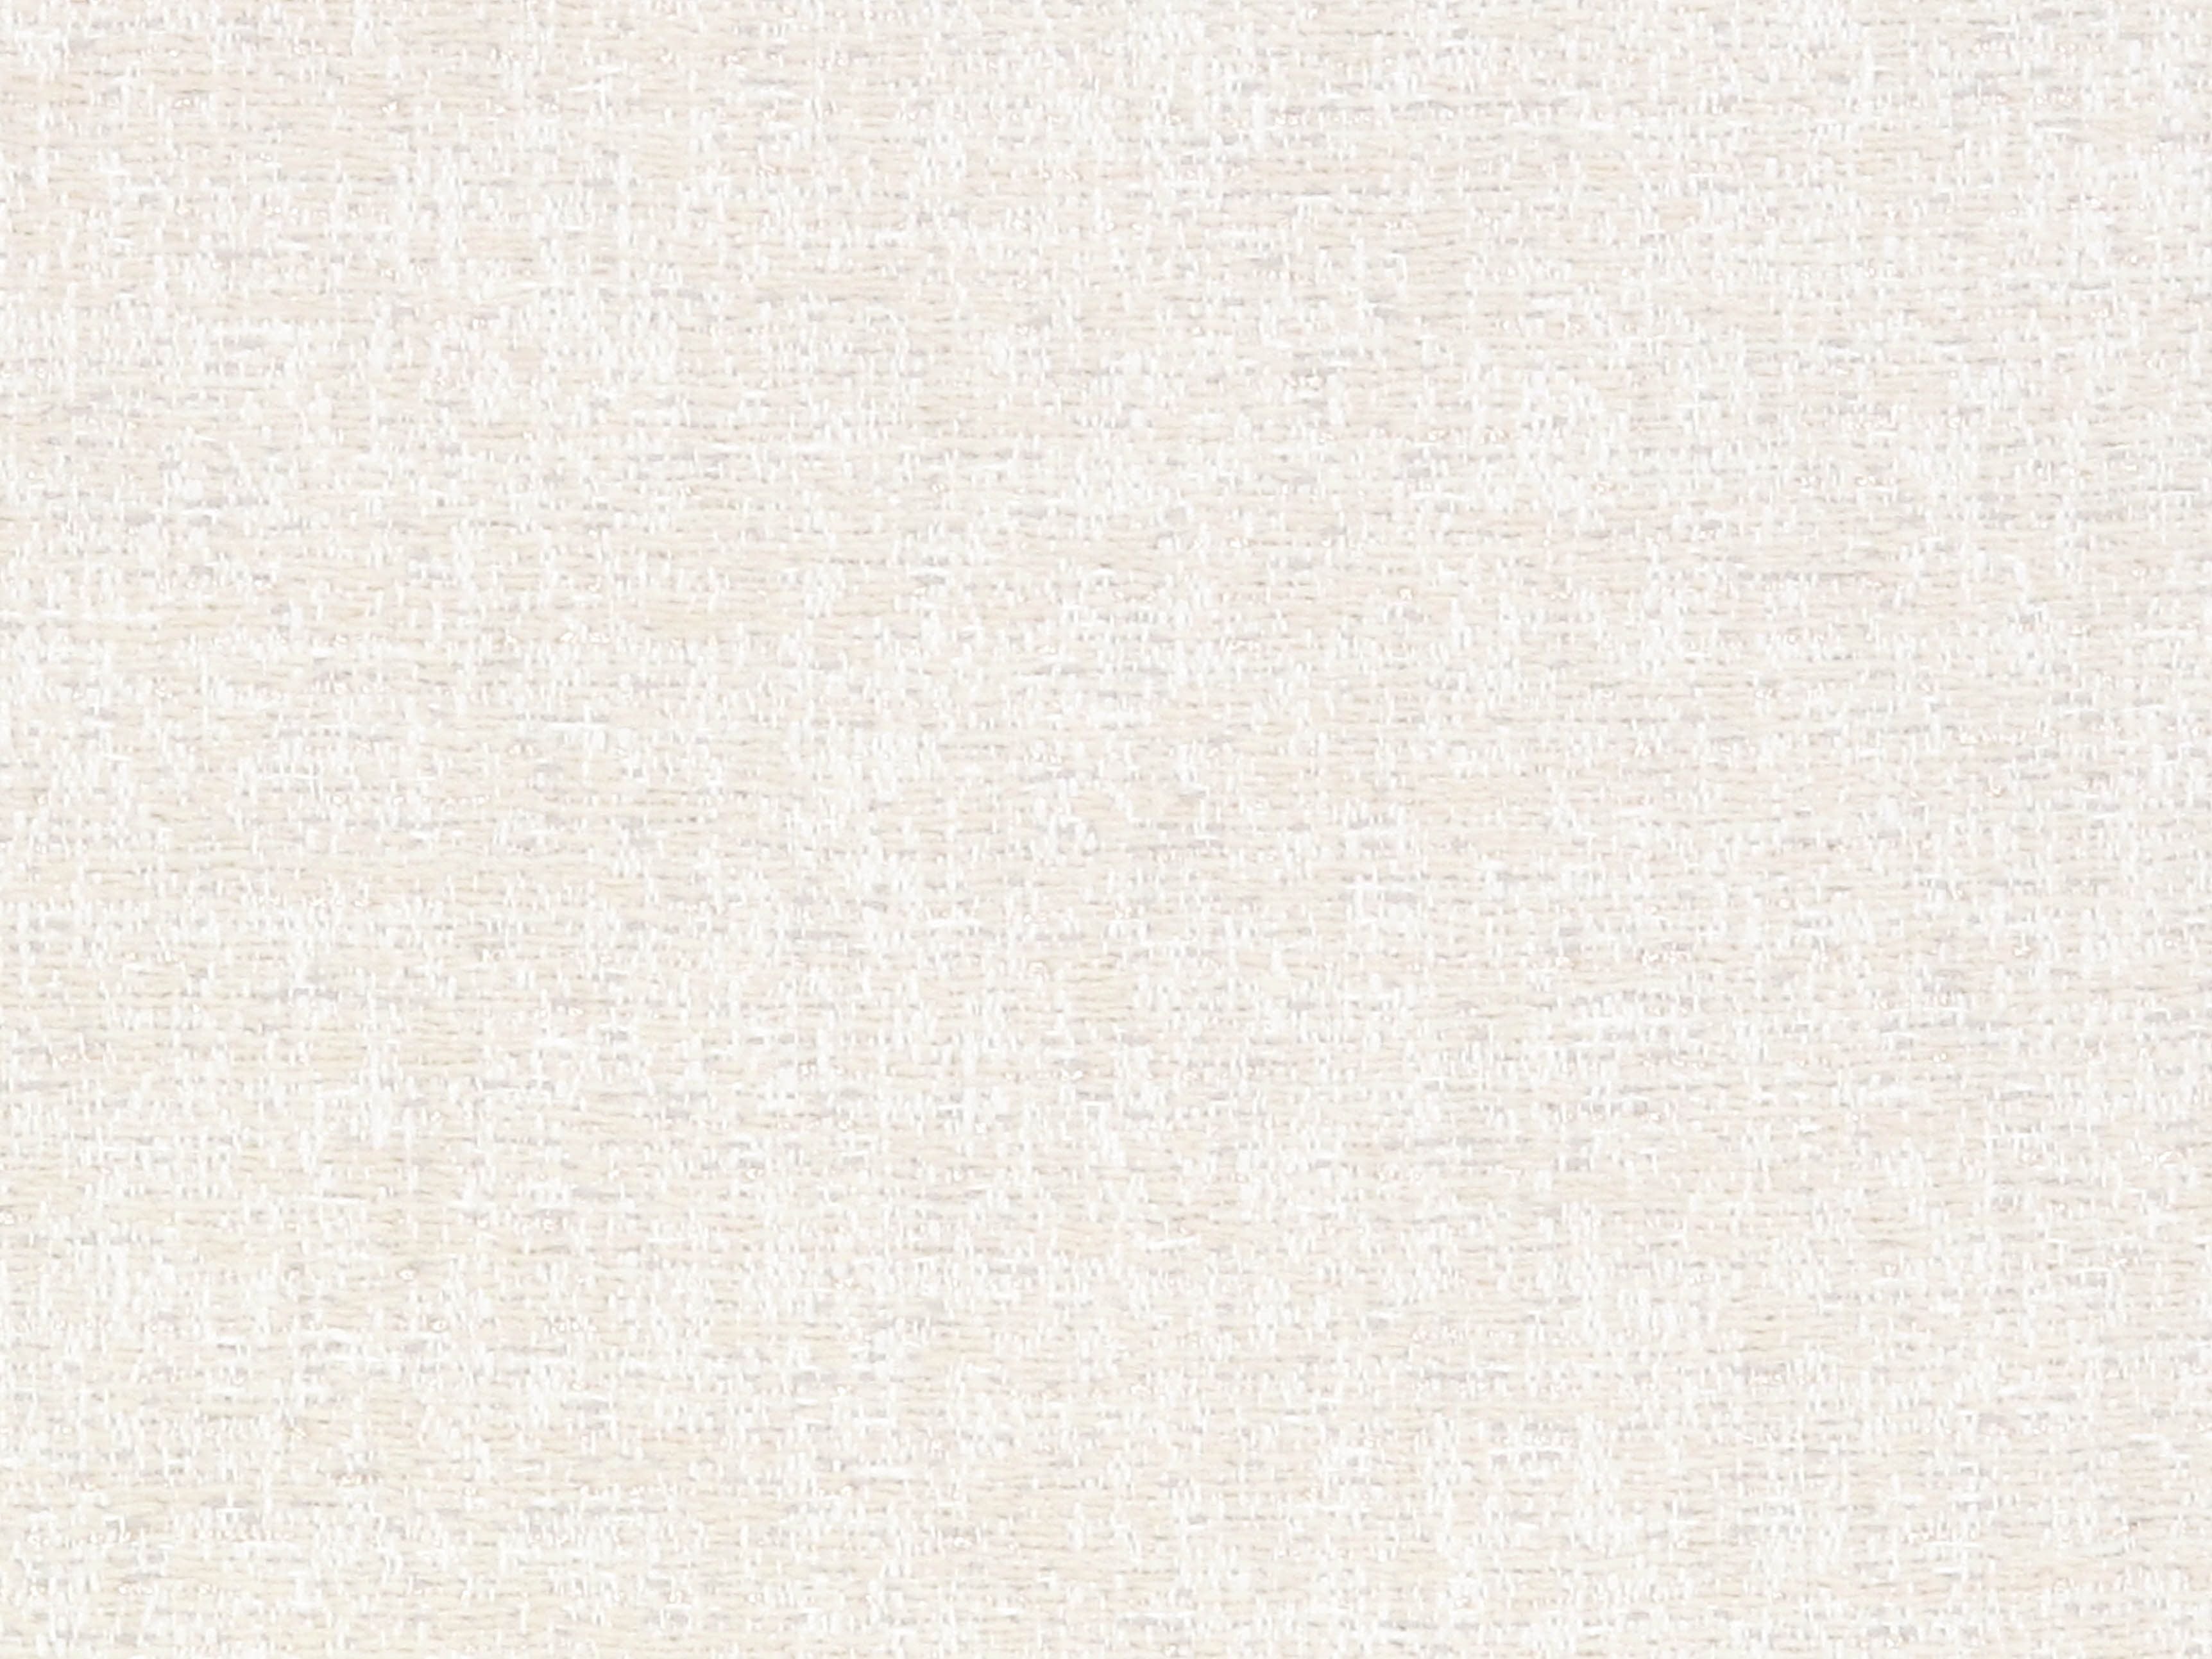 Belle Neige fabric in winter white color - pattern number EY 0028D012 - by Scalamandre in the Old World Weavers collection